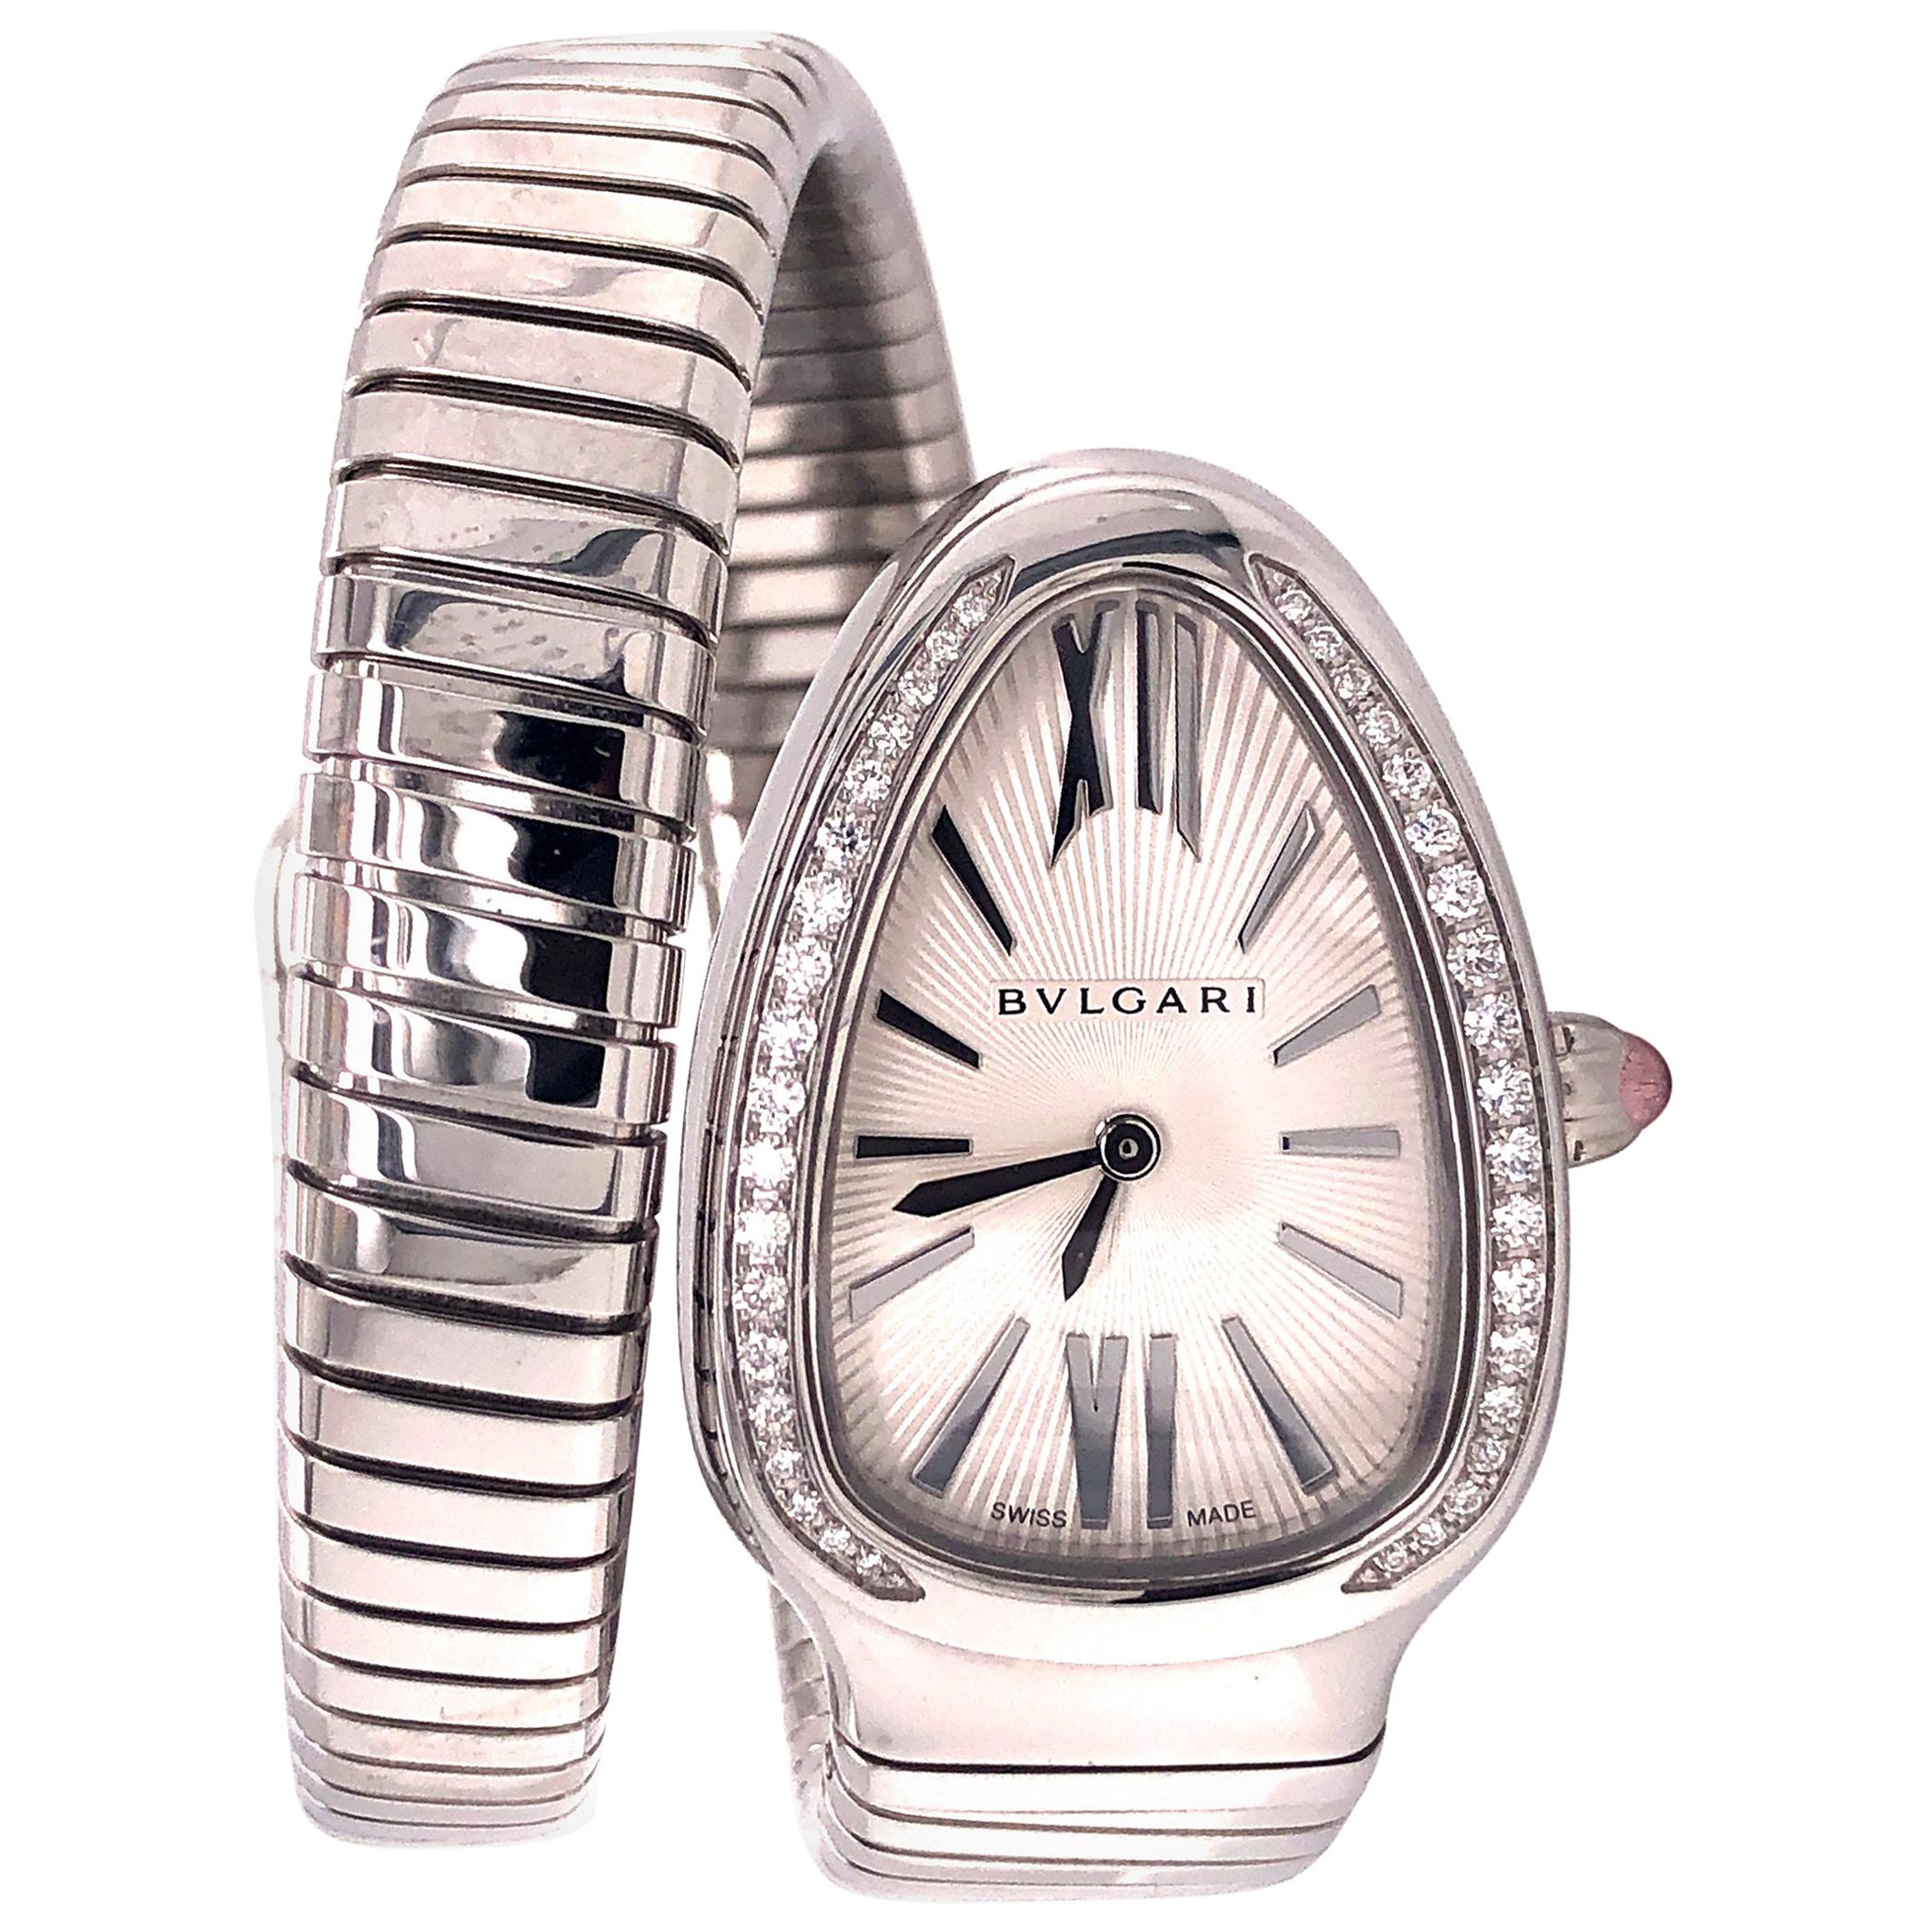                               Bvlgari Serpenti Silver Dial Diamond Bezel Ladies Watch 101827 NEW

Gorgeous ladies watch that is 100% brand new, with new stickers, complete with box tags and paper work.  Bid confidently in this amazing 100% authentic